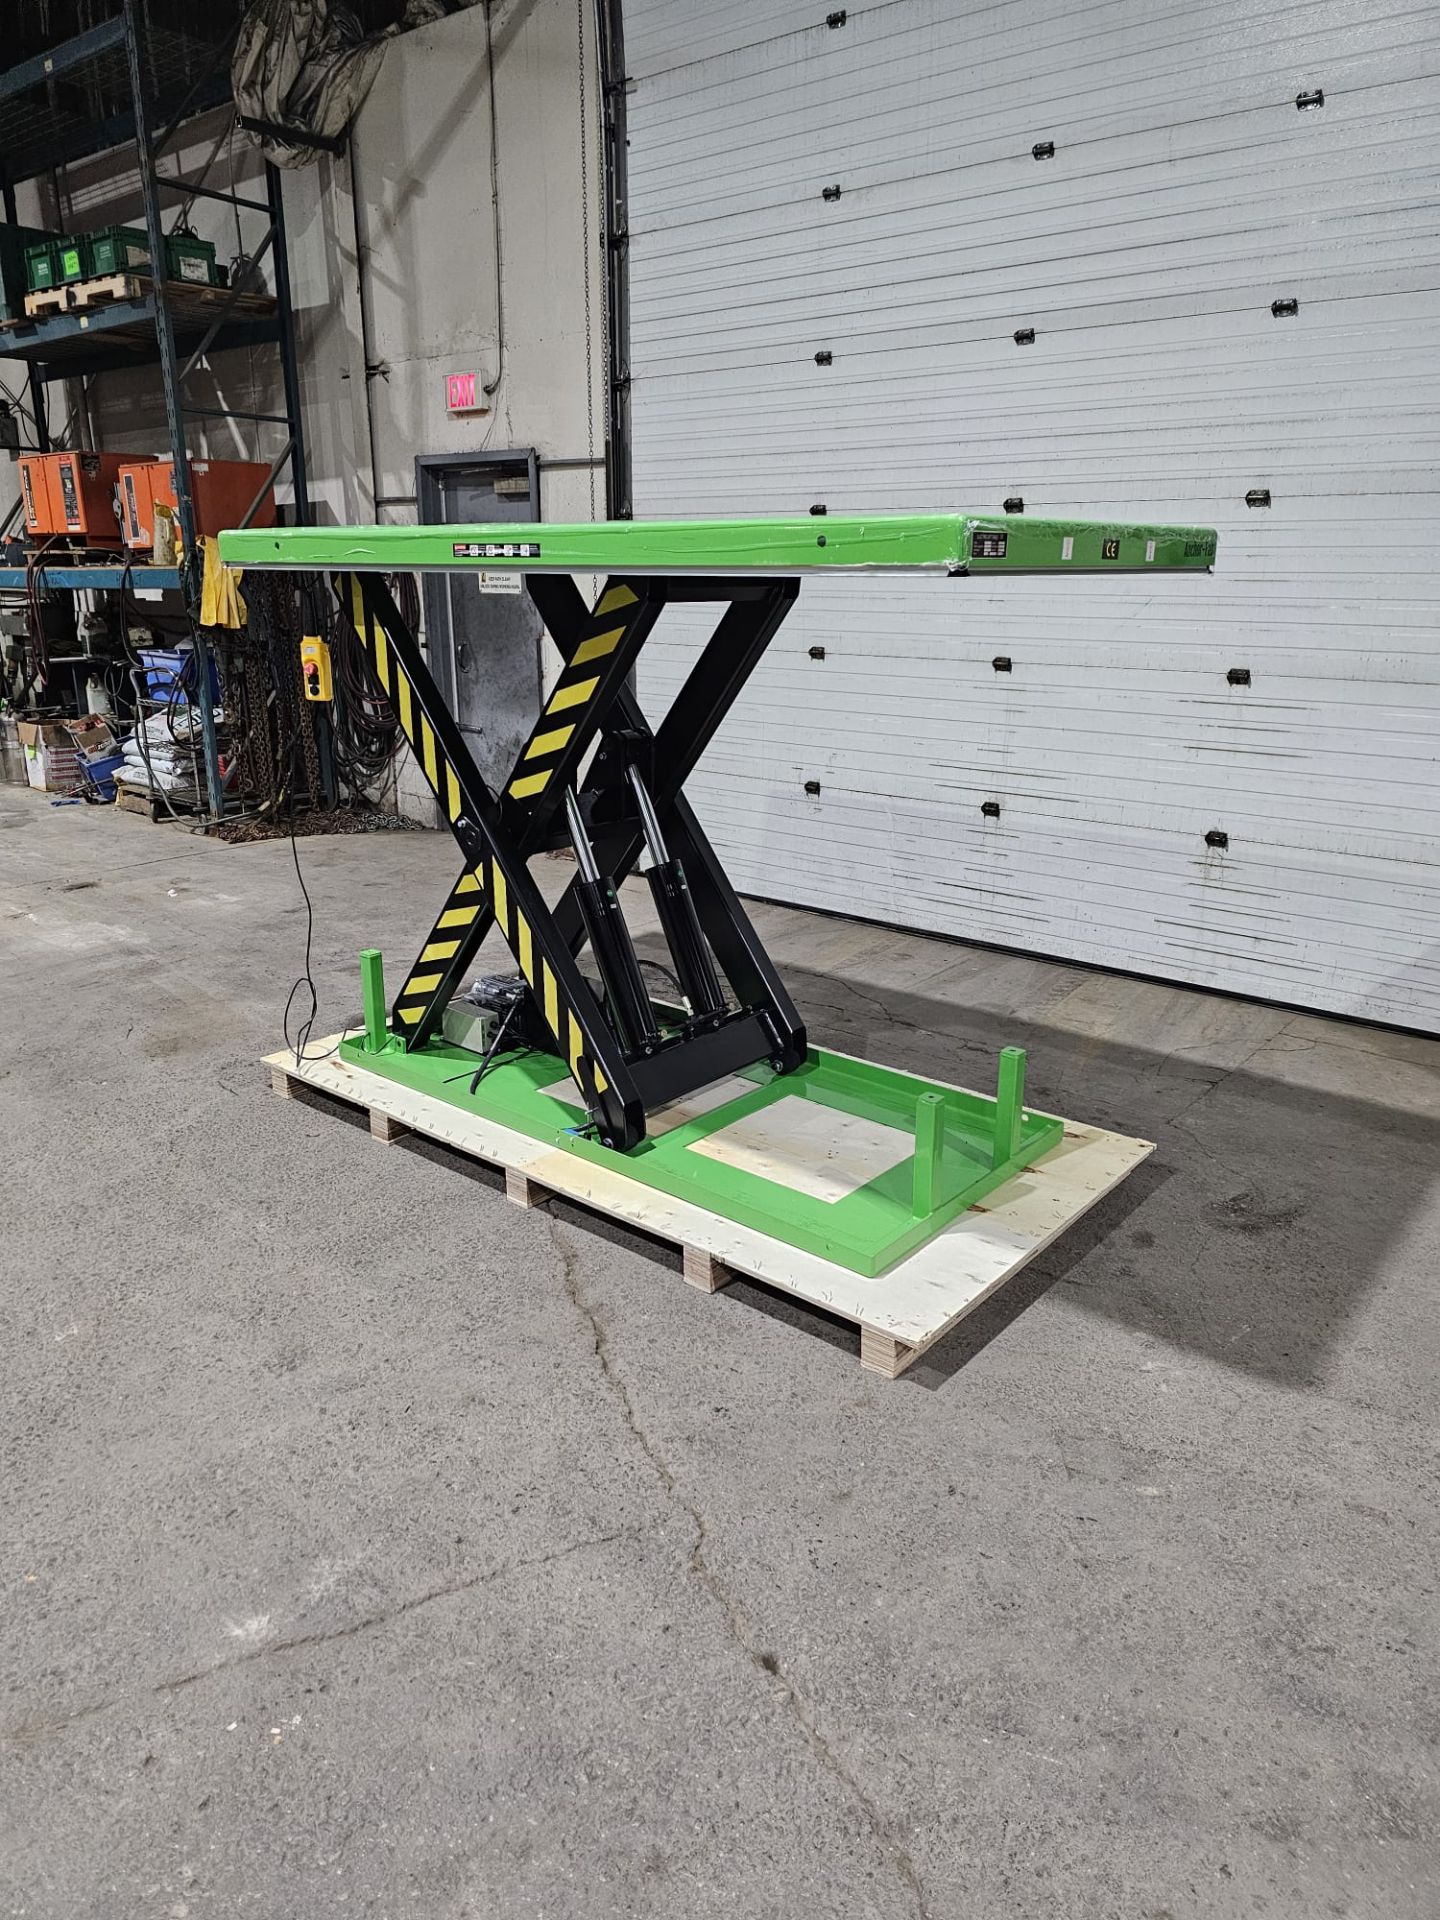 HW Hydraulic Lift Table 94" x 47" x 64" lift - 11,000lbs capacity - UNUSED and MINT - 220V - Image 8 of 8